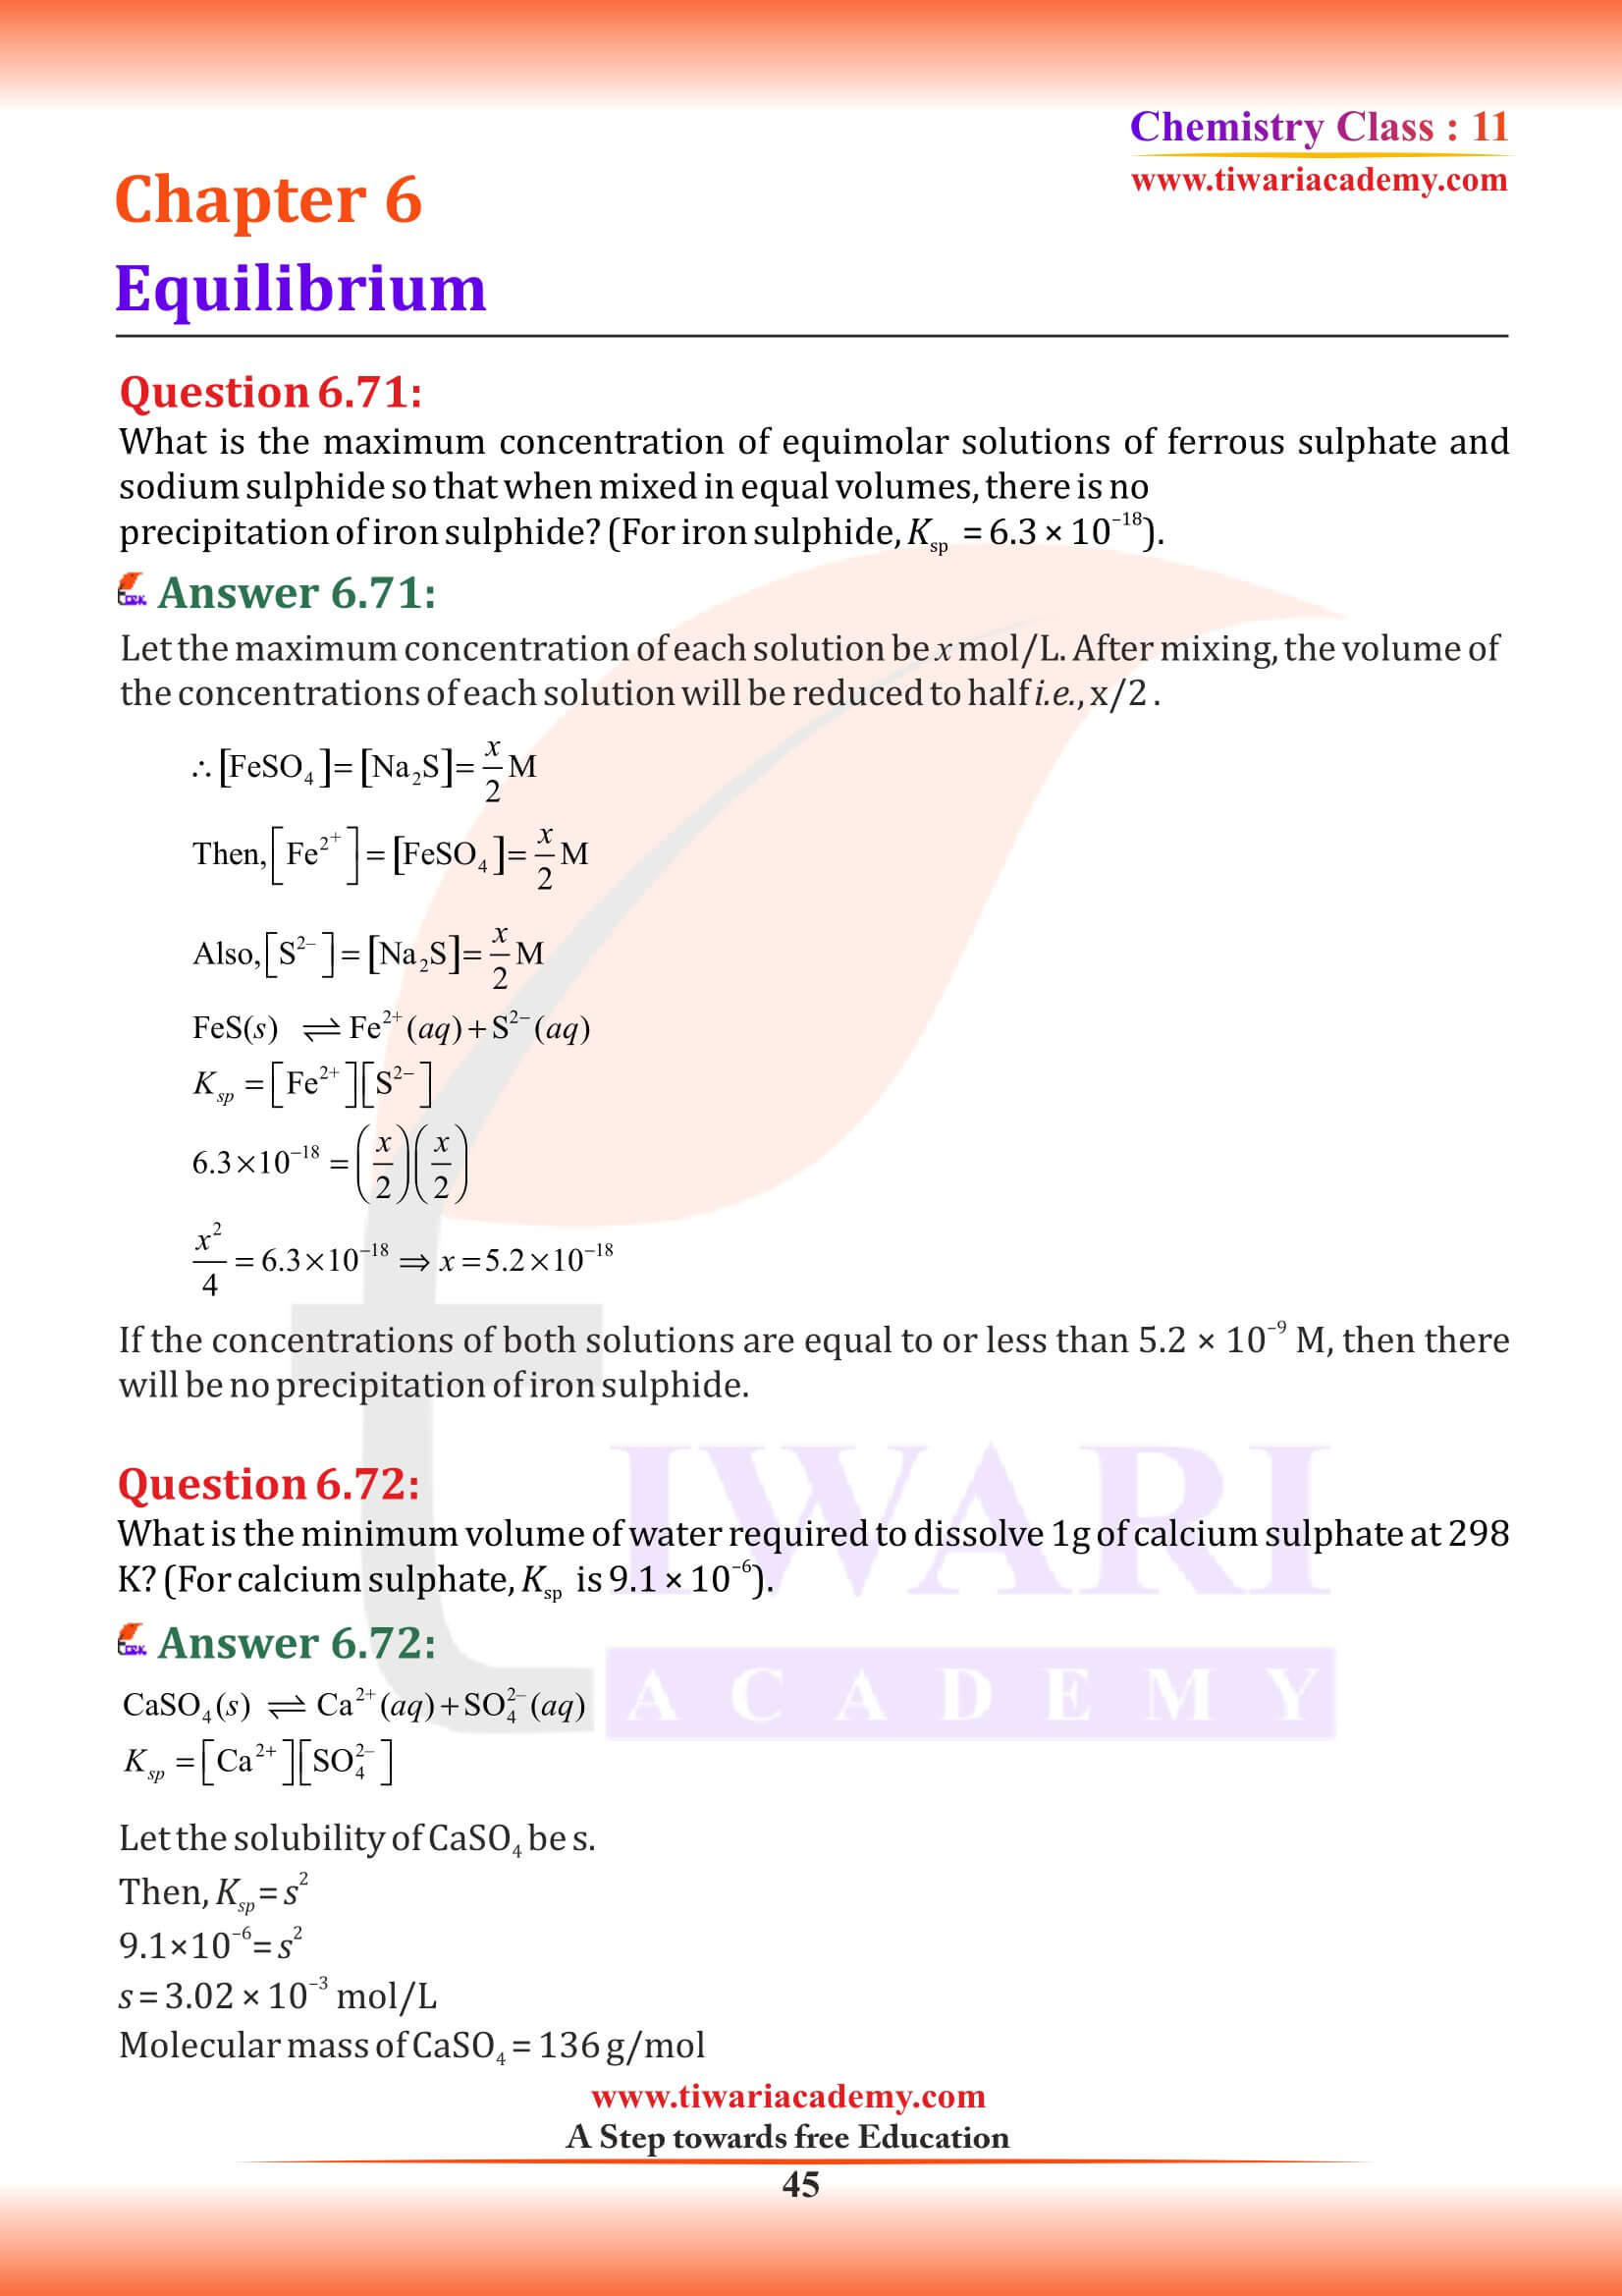 NCERT Class 11 Chem Chapter 6 guide free